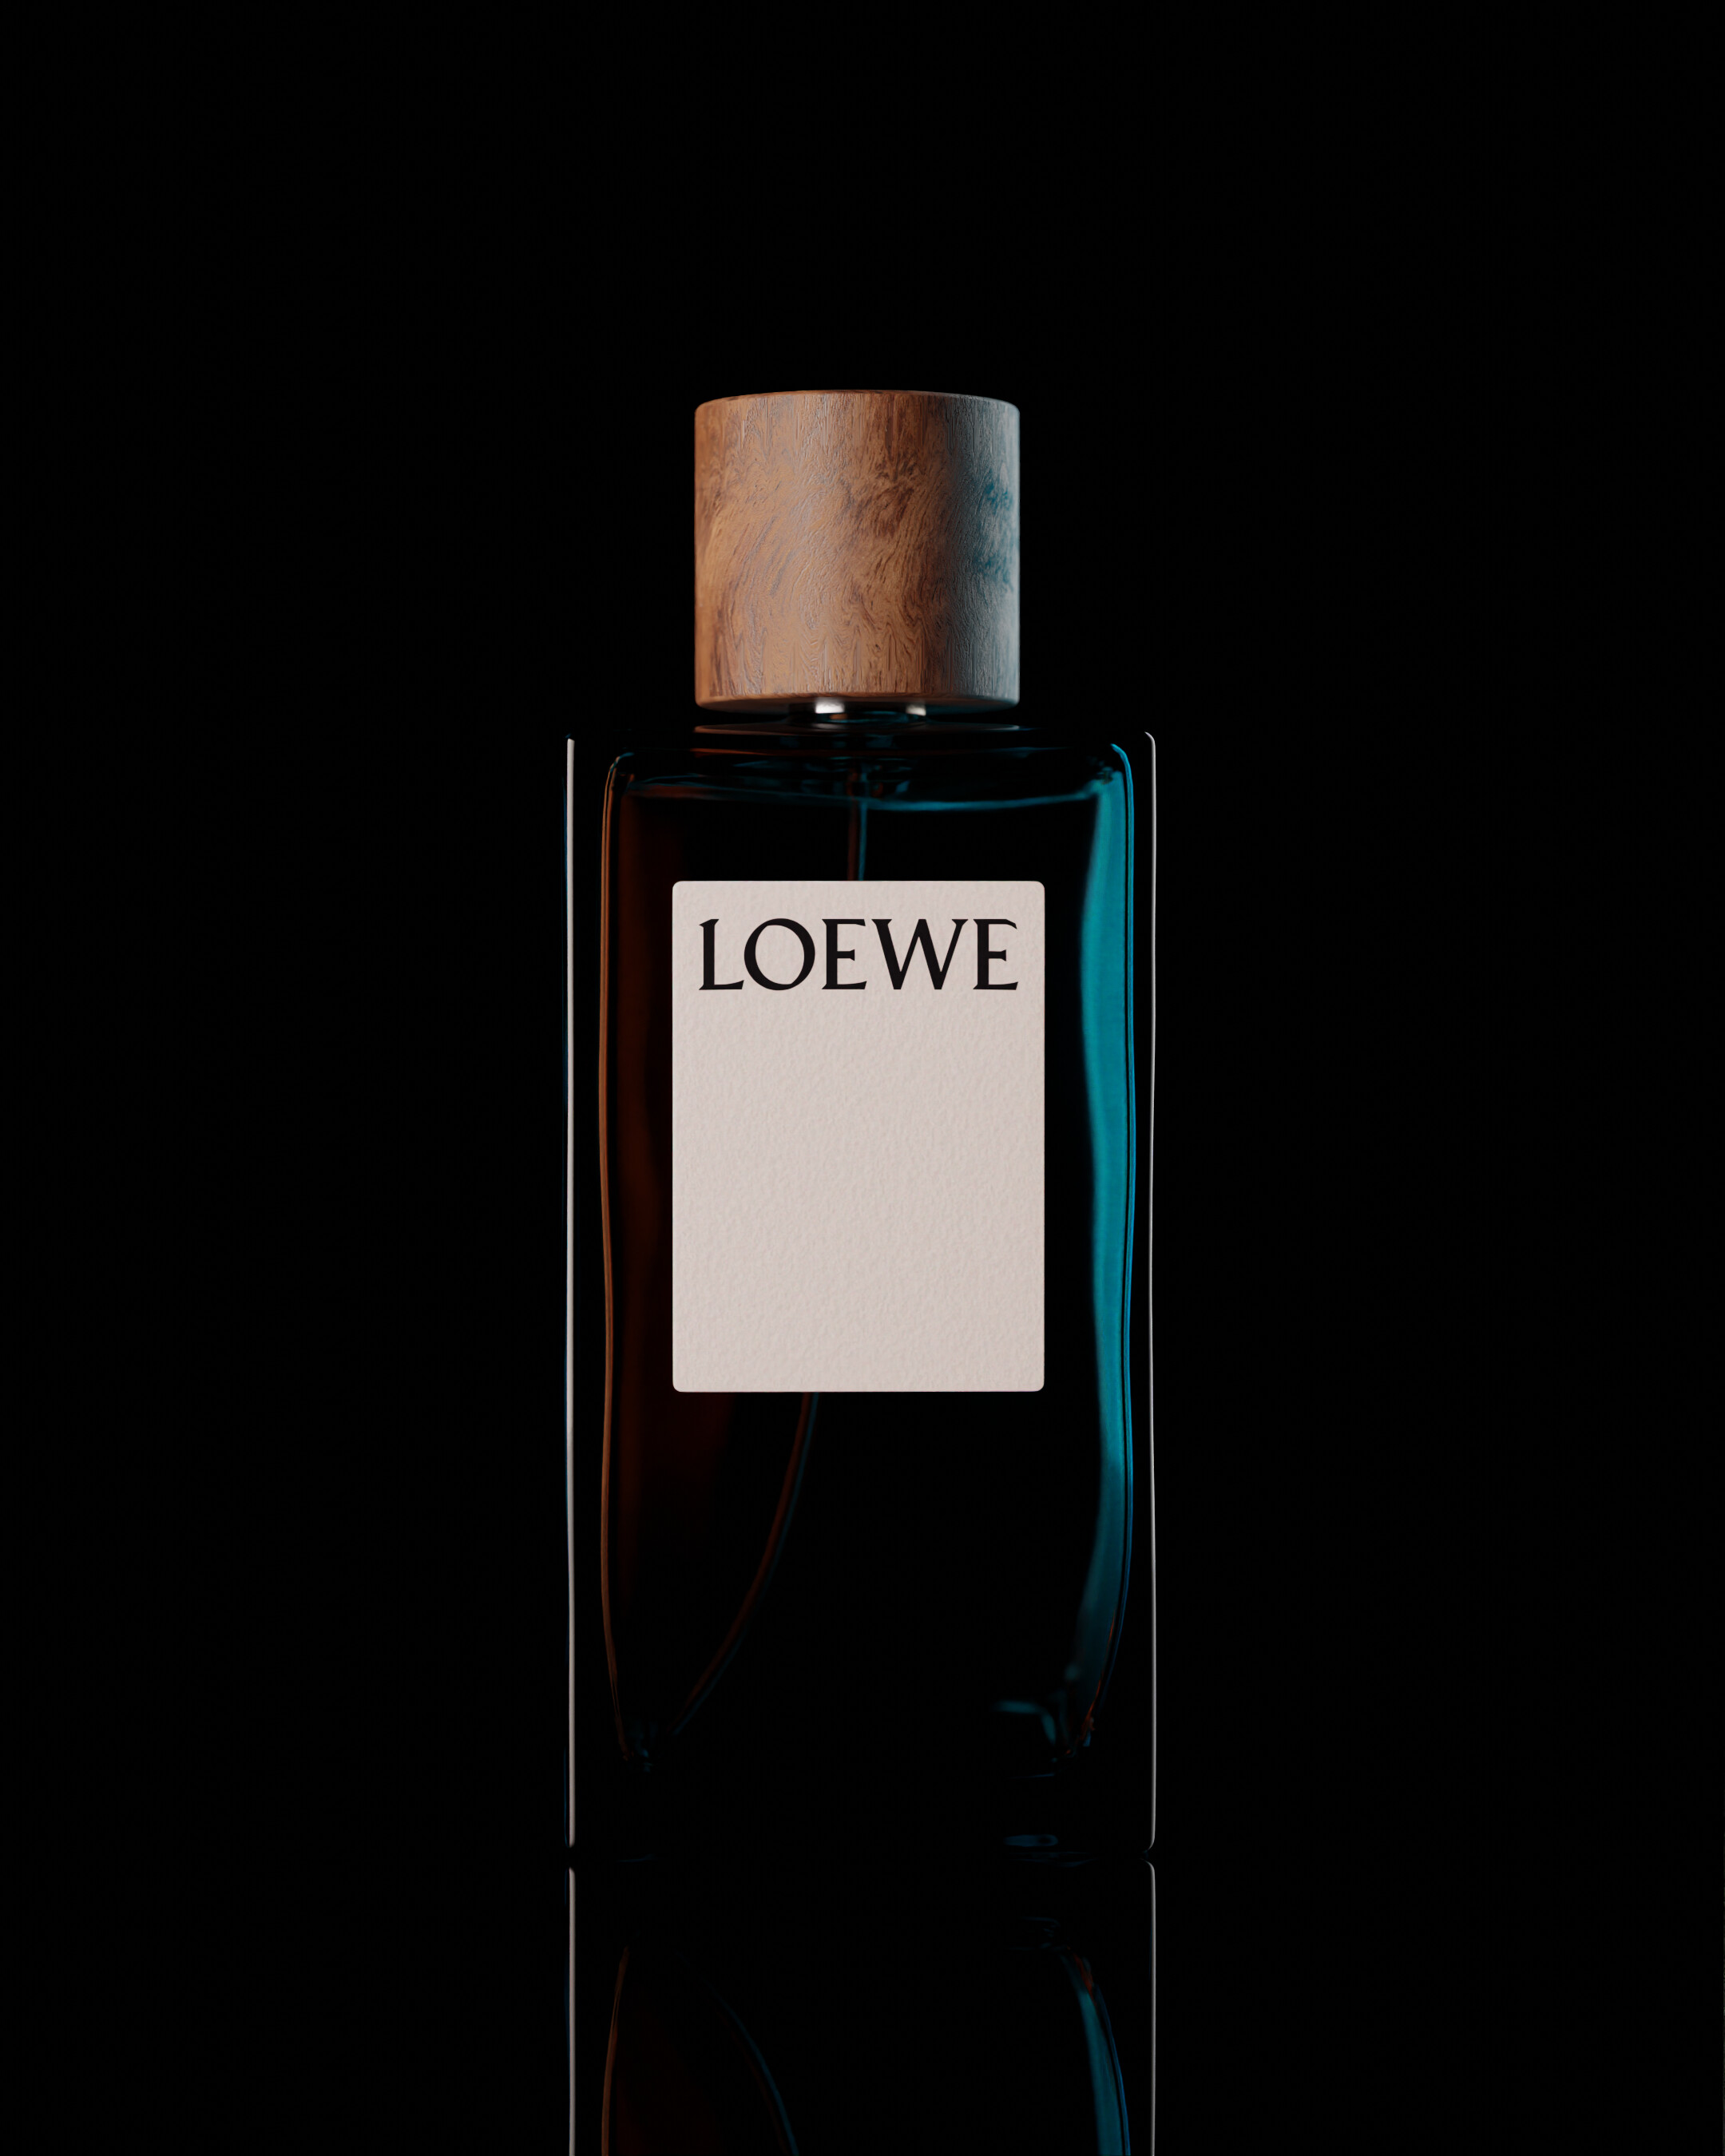 Loewe Parfum - A Light Group Study - Finished Projects - Blender